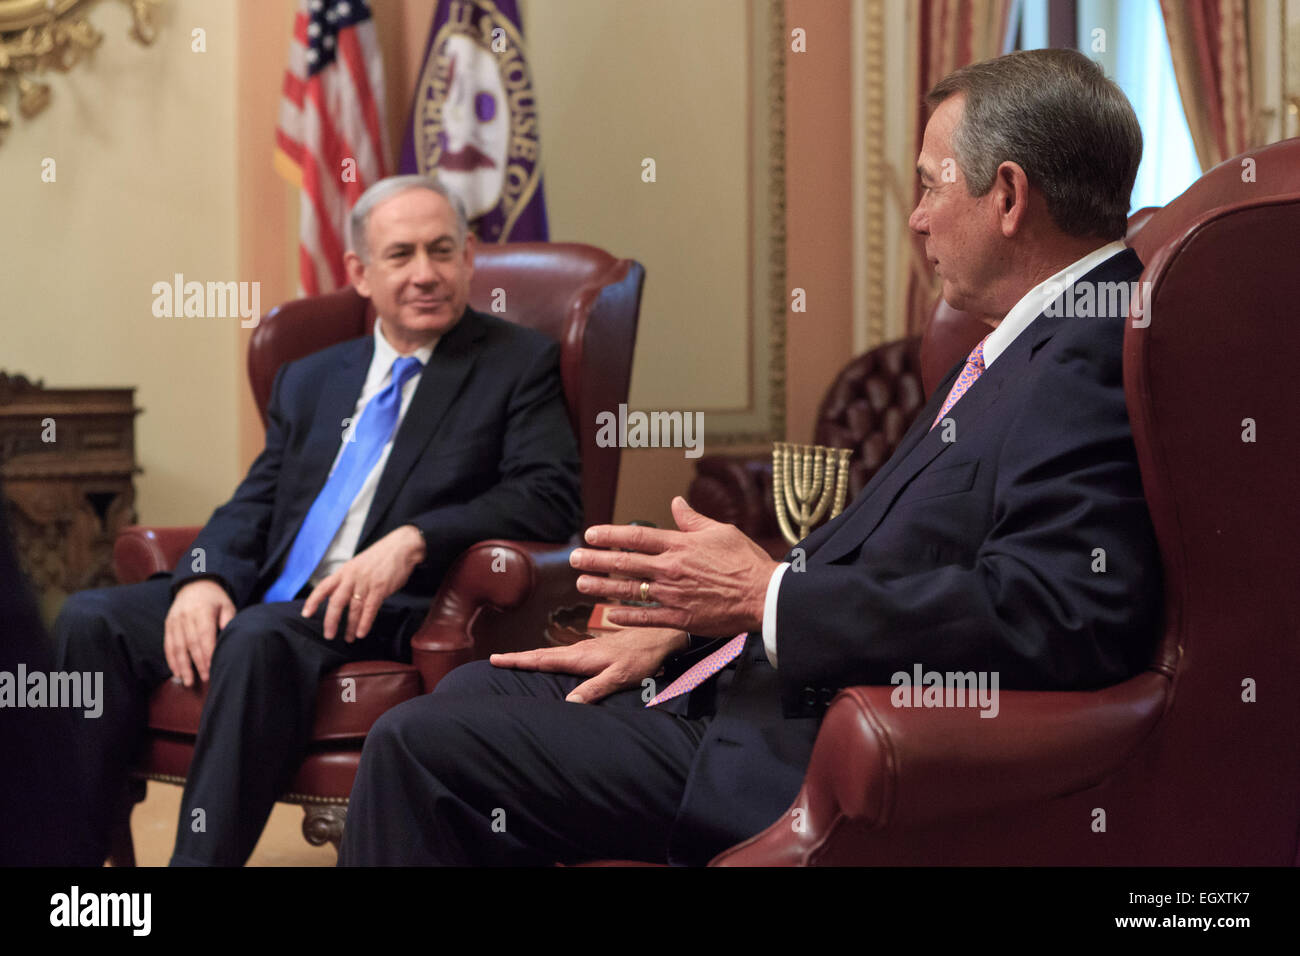 US Speaker of the House John Boehner meets Israeli Prime Minister Benjamin Netanyahu before his third addresses to a joint session of Congress March 3, 2015 in Washington, DC. Netanyahu was invited by the Republican majority against usual protocol and railed against a possible Iranian nuclear deal currently being negotiated by U.S. Secretary of State John Kerry. Stock Photo